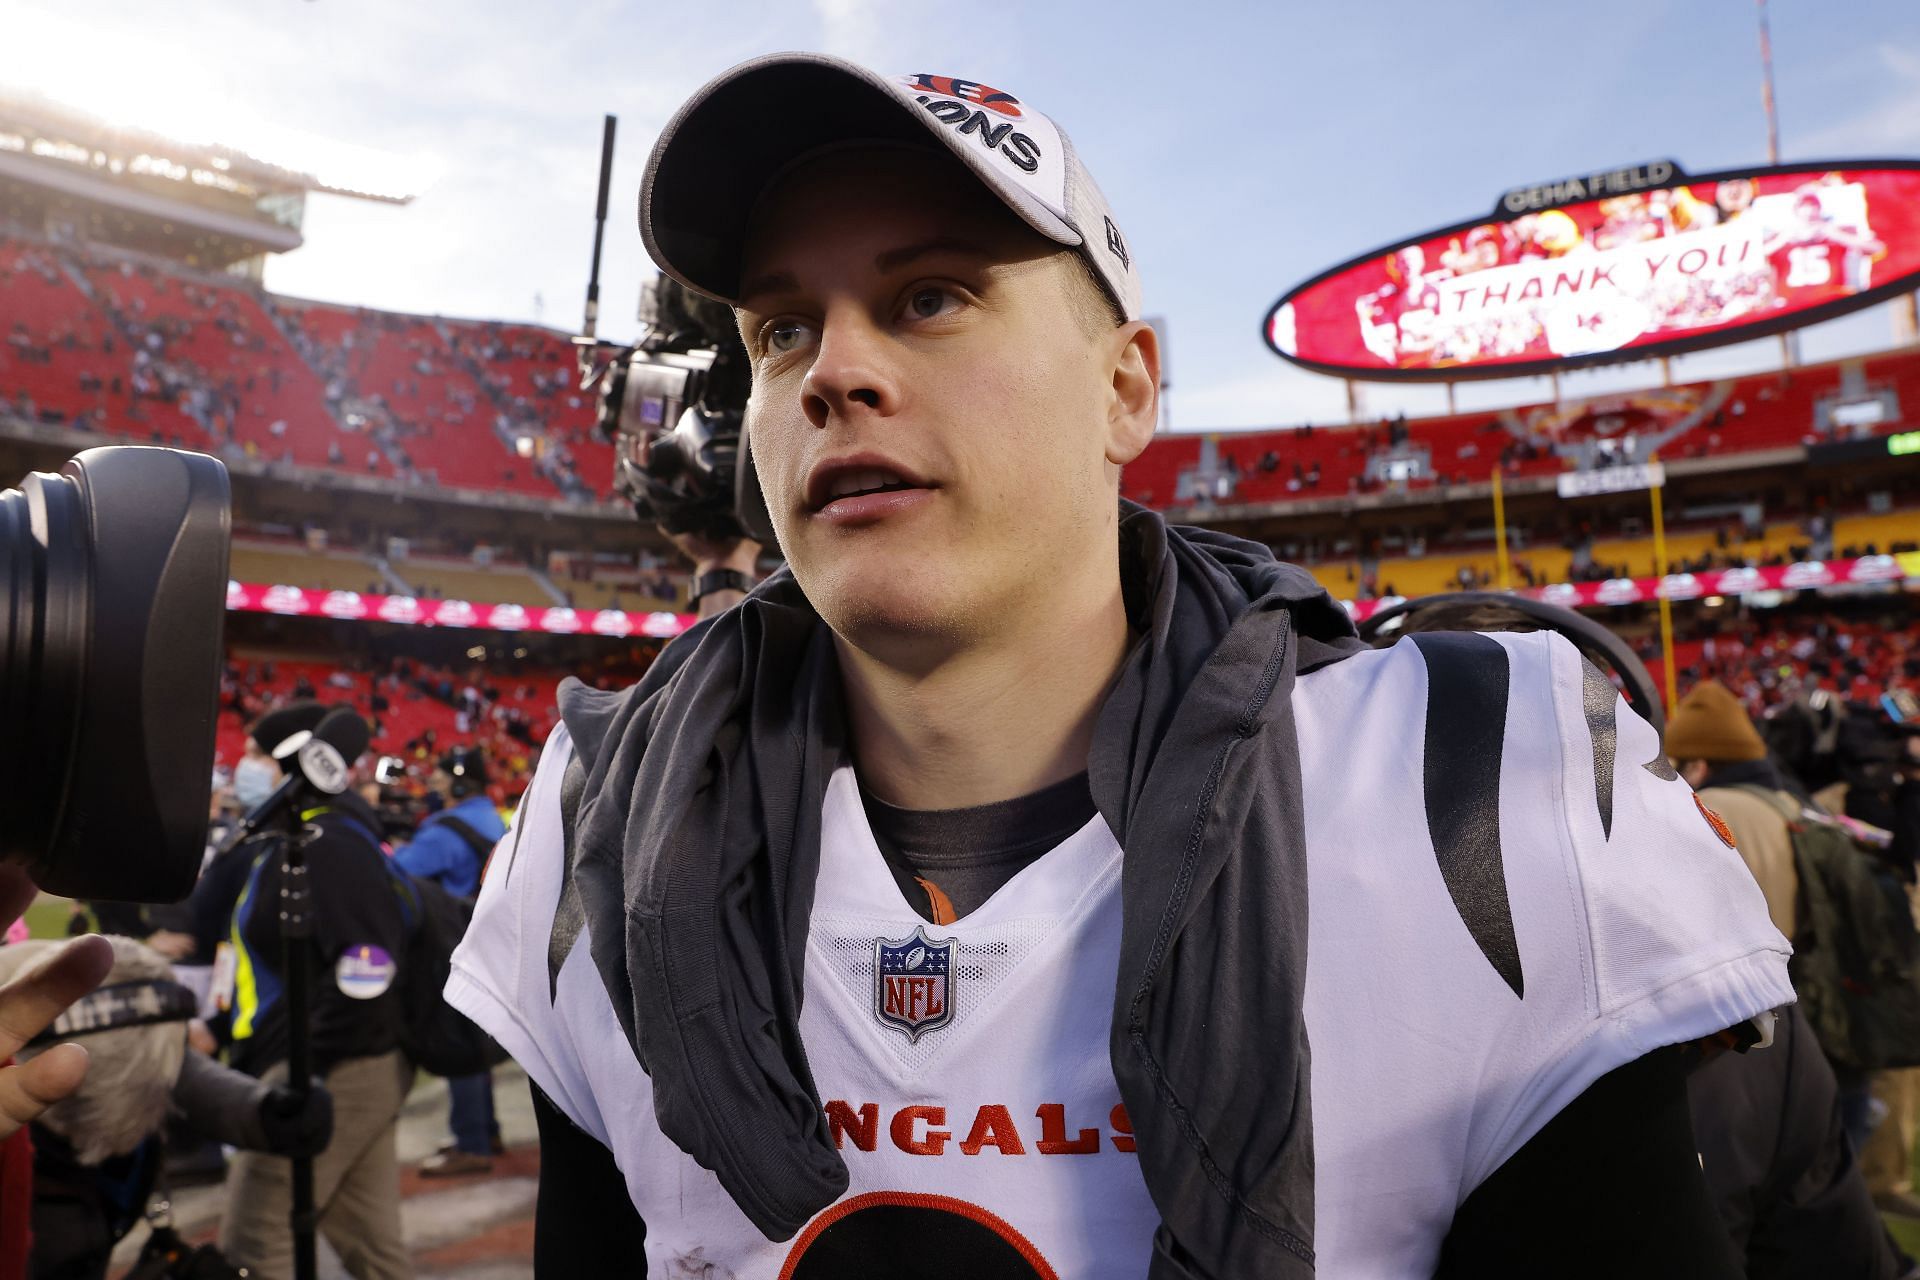 Joe Burrow reveals which NFL team and QB he grew up rooting for